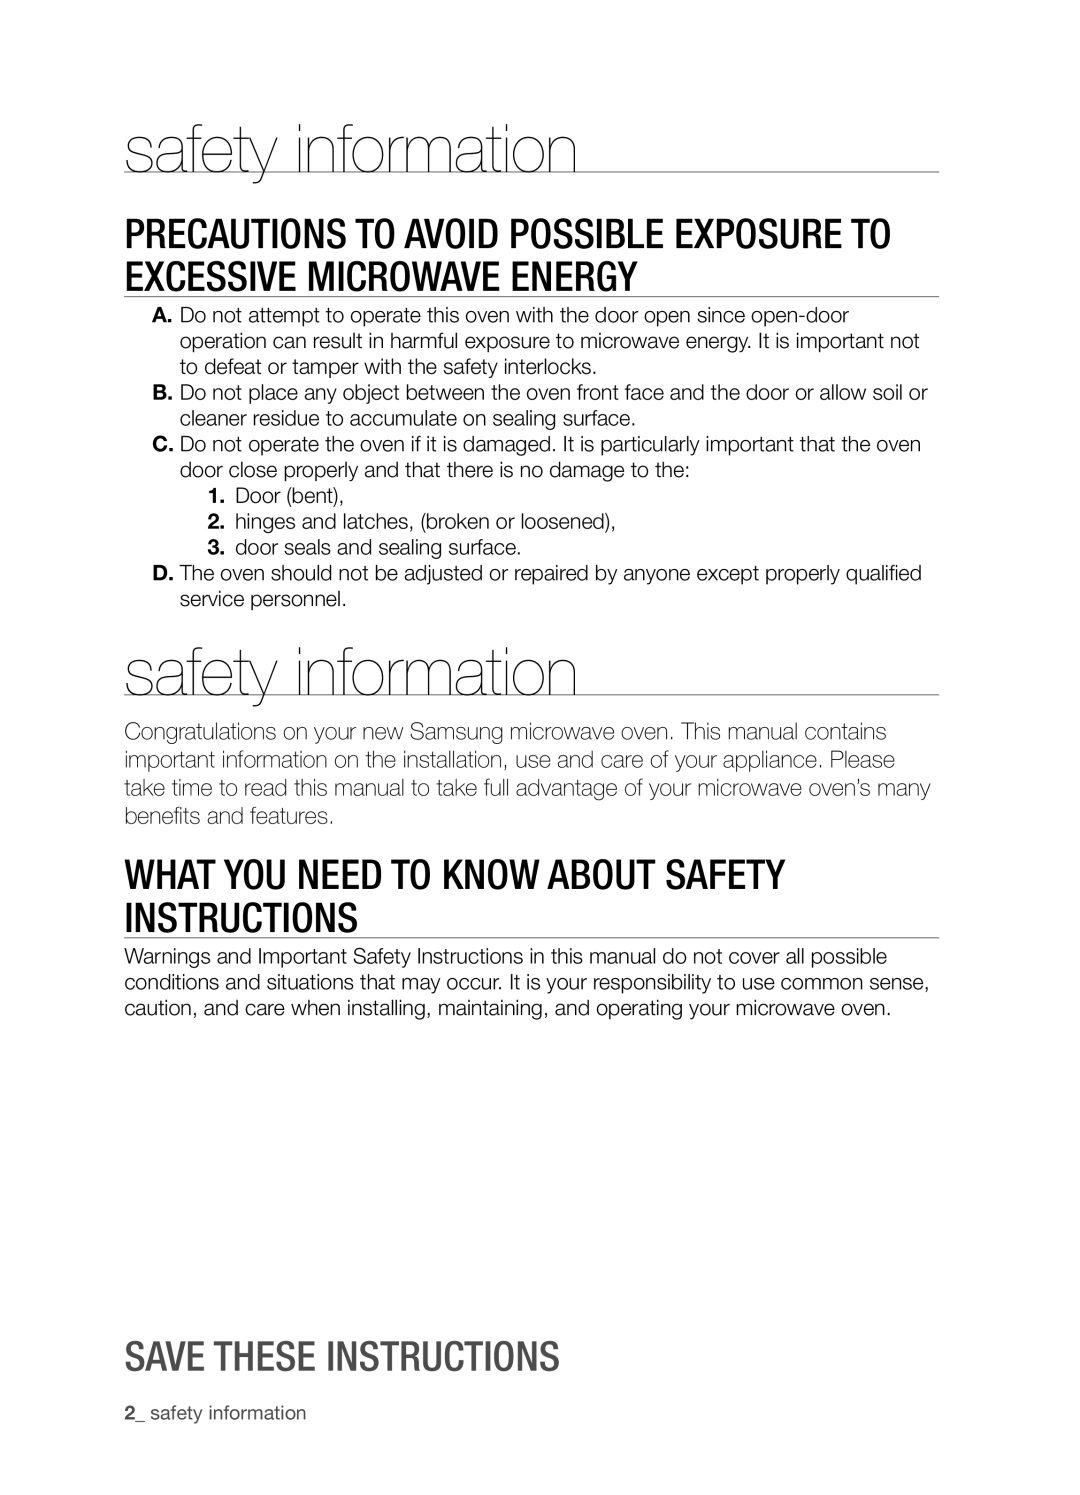 Samsung SMH9207ST user manual safety information, What you need to know about safety instructions, Save these instructions 